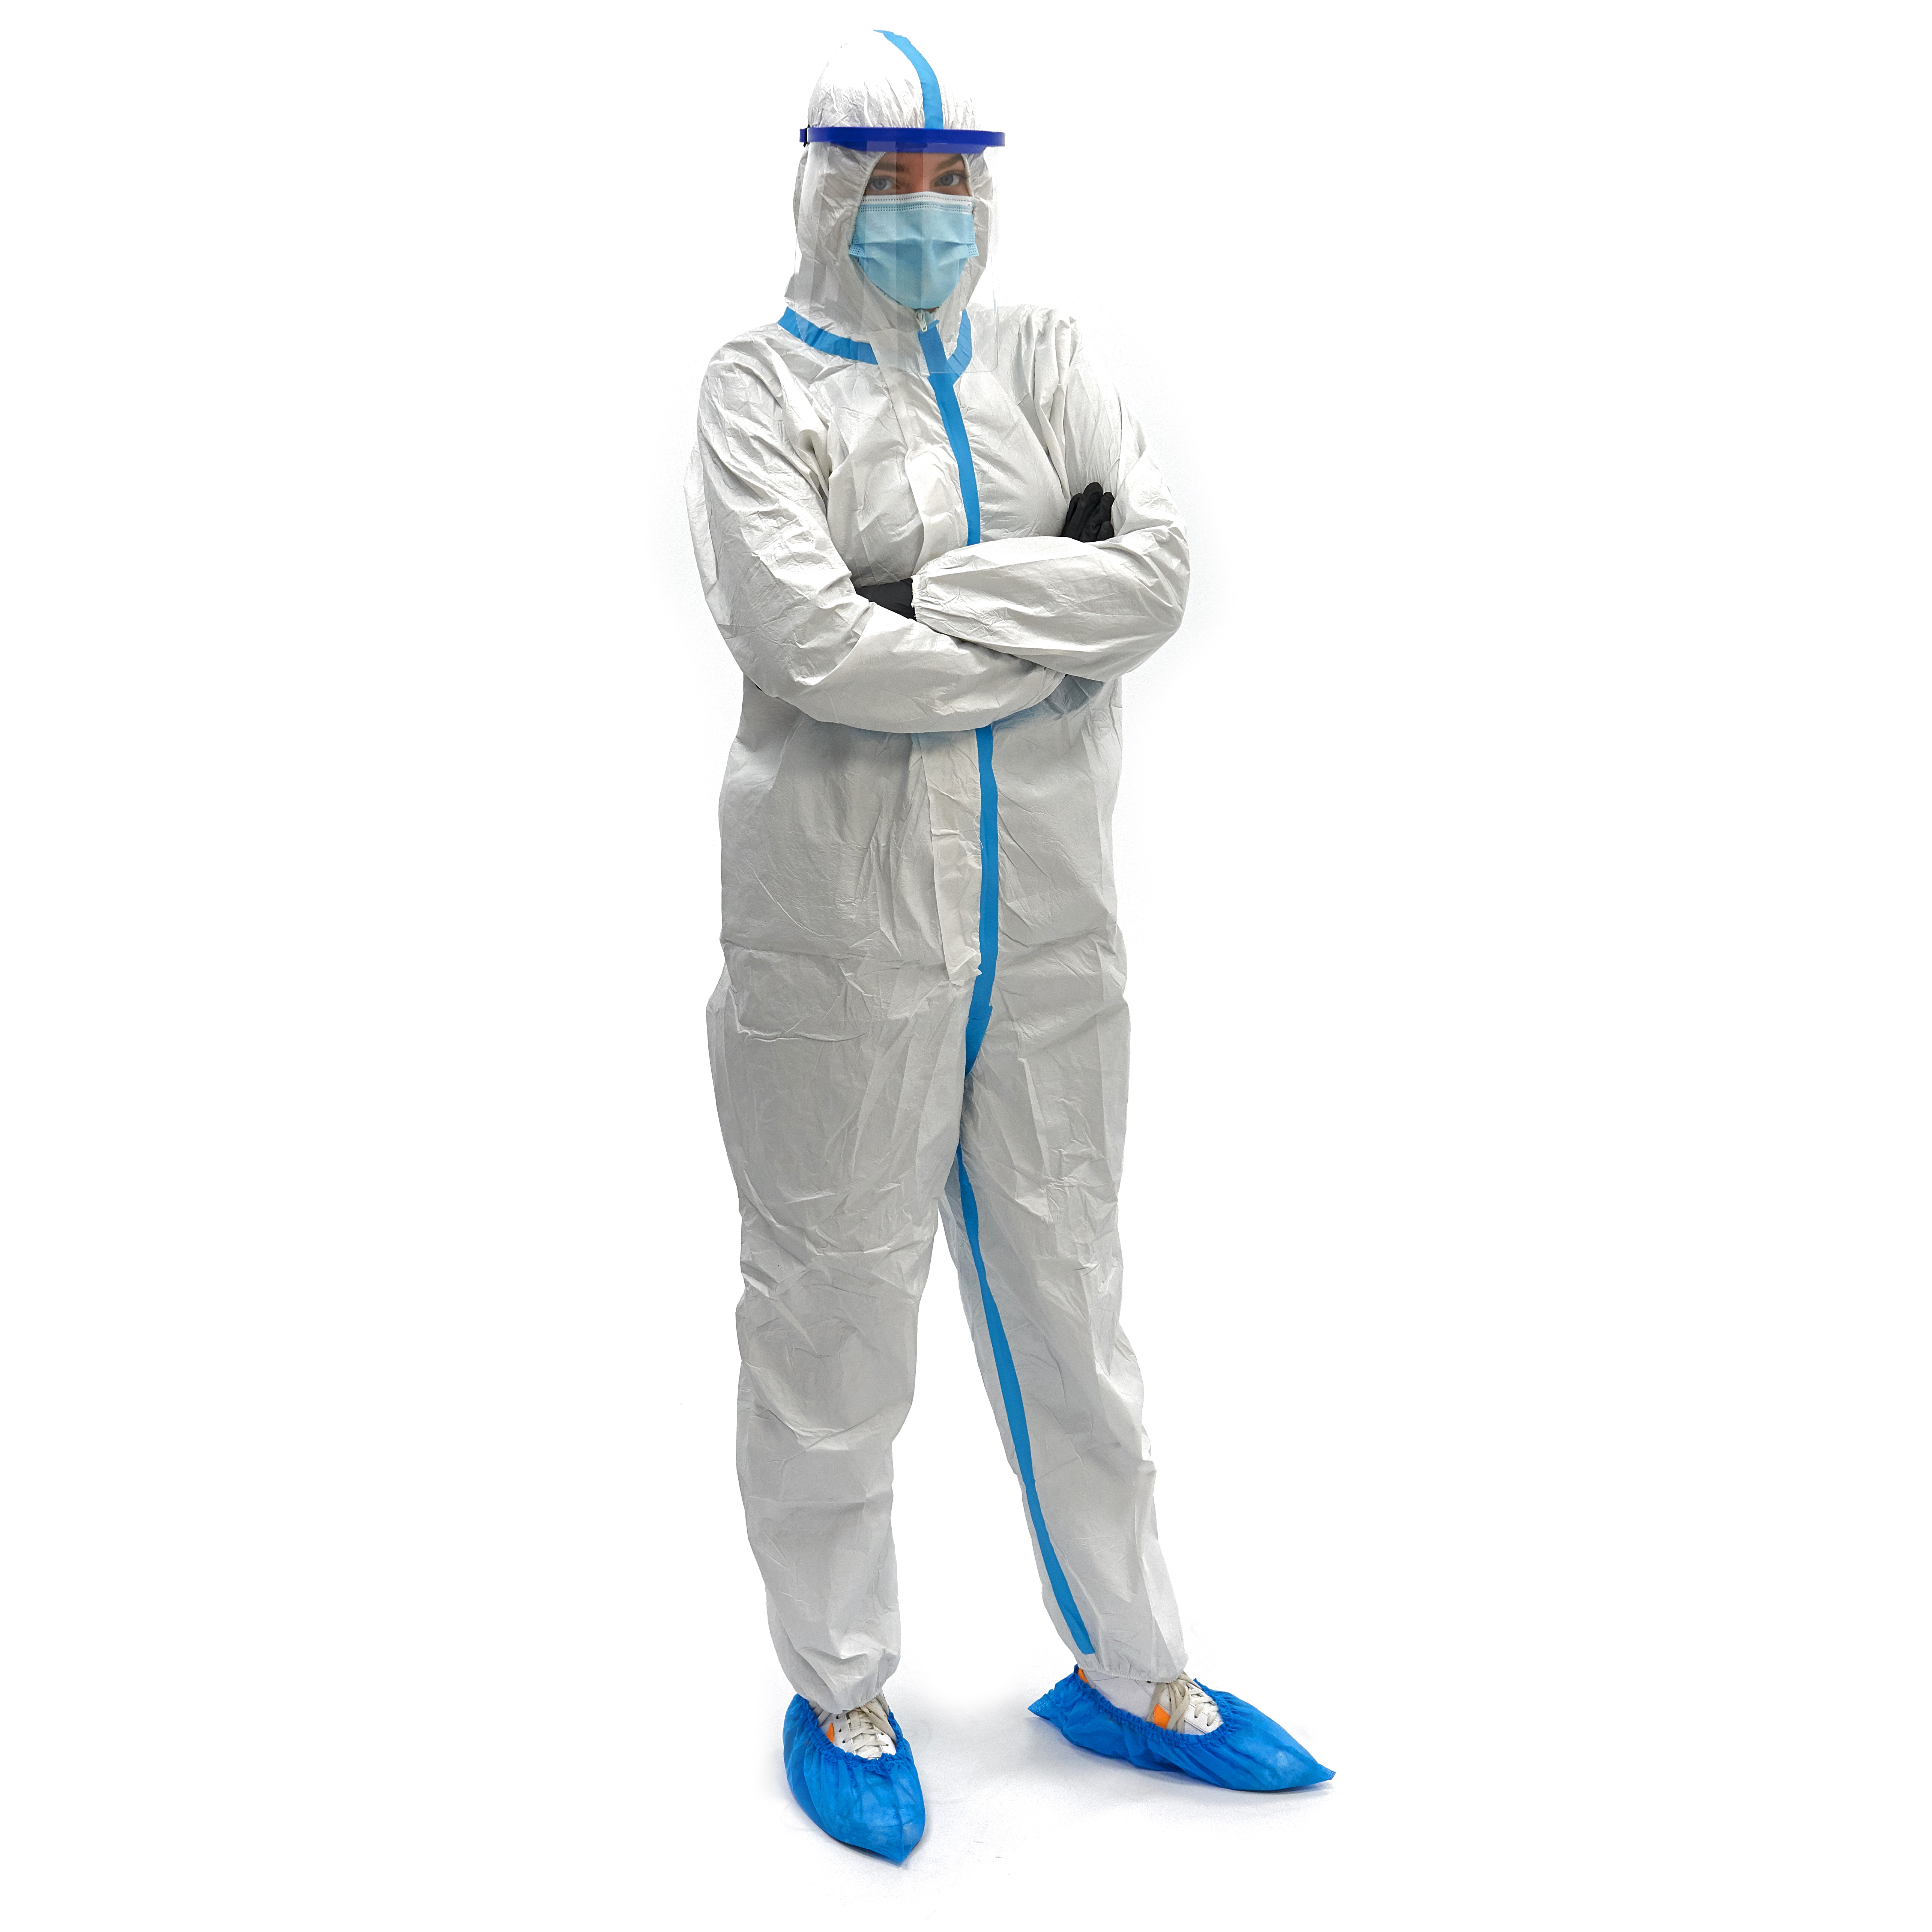 COVE-D-L Romed Disposable Coveralls, Cat III, microporous, packed per piece, 50 pcs in a carton. Size: Large

• 60 grams